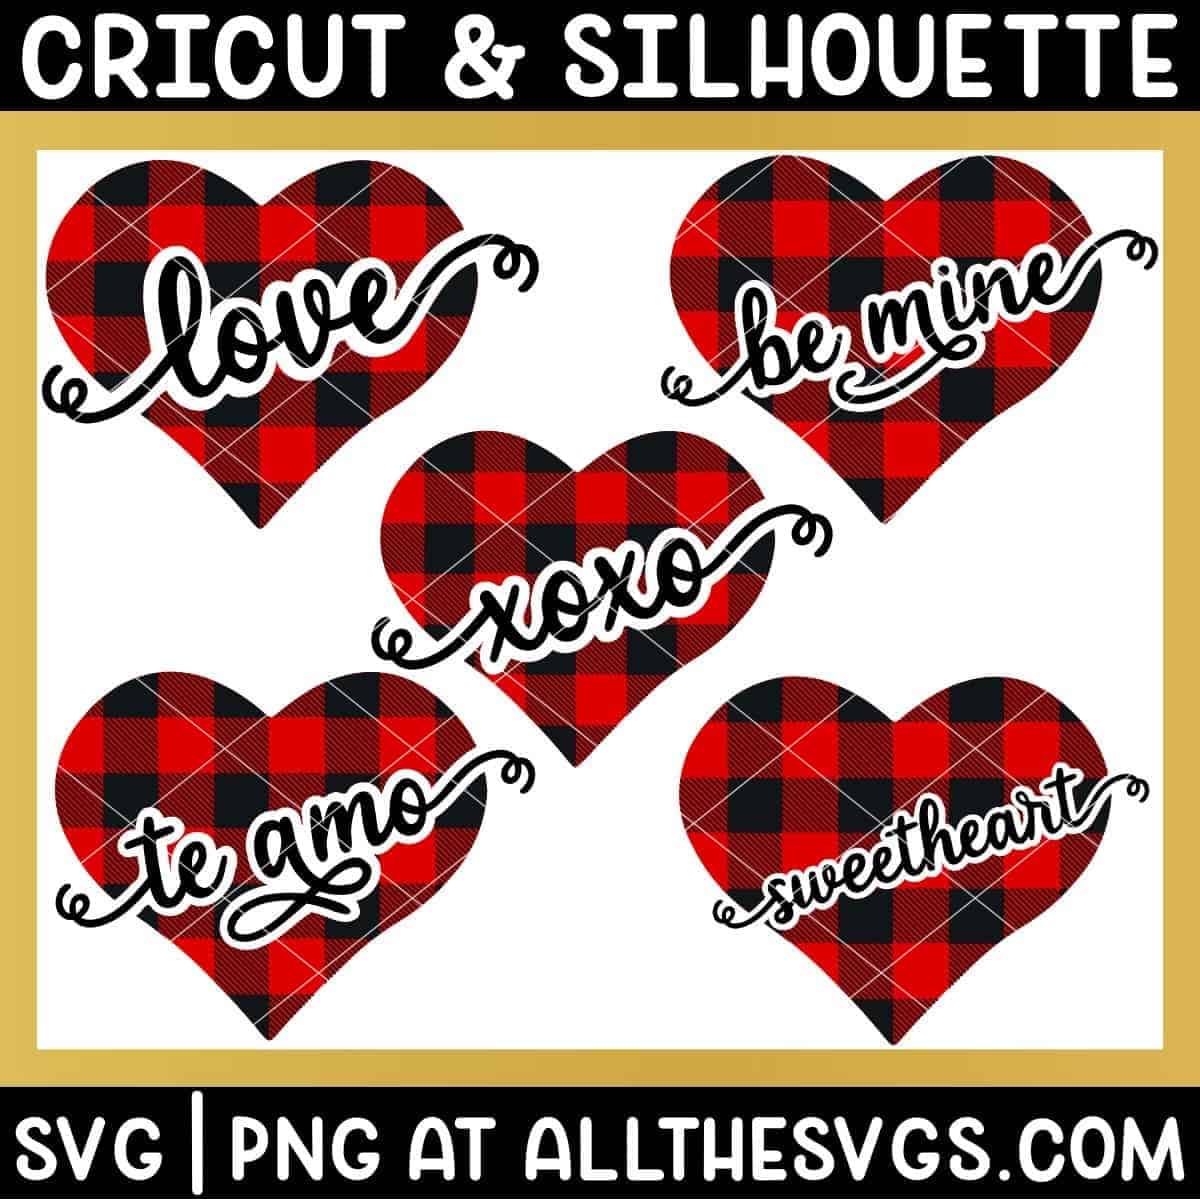 buffalo checkered symmetrical hearts with valentine phrases sliced out.